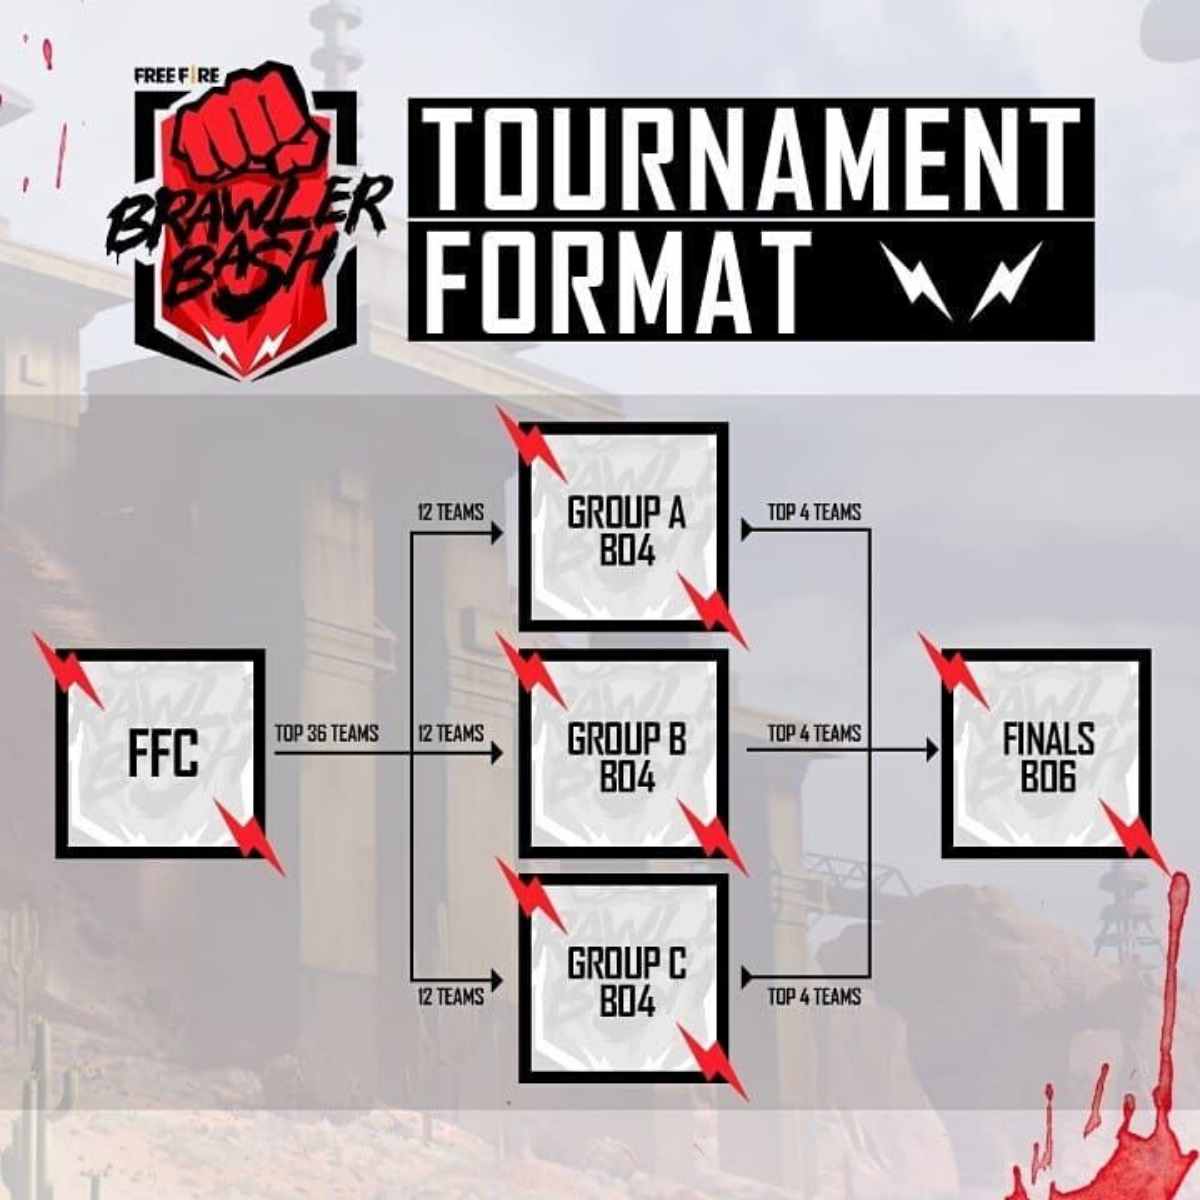 Free Fire brawler bash tournament stages